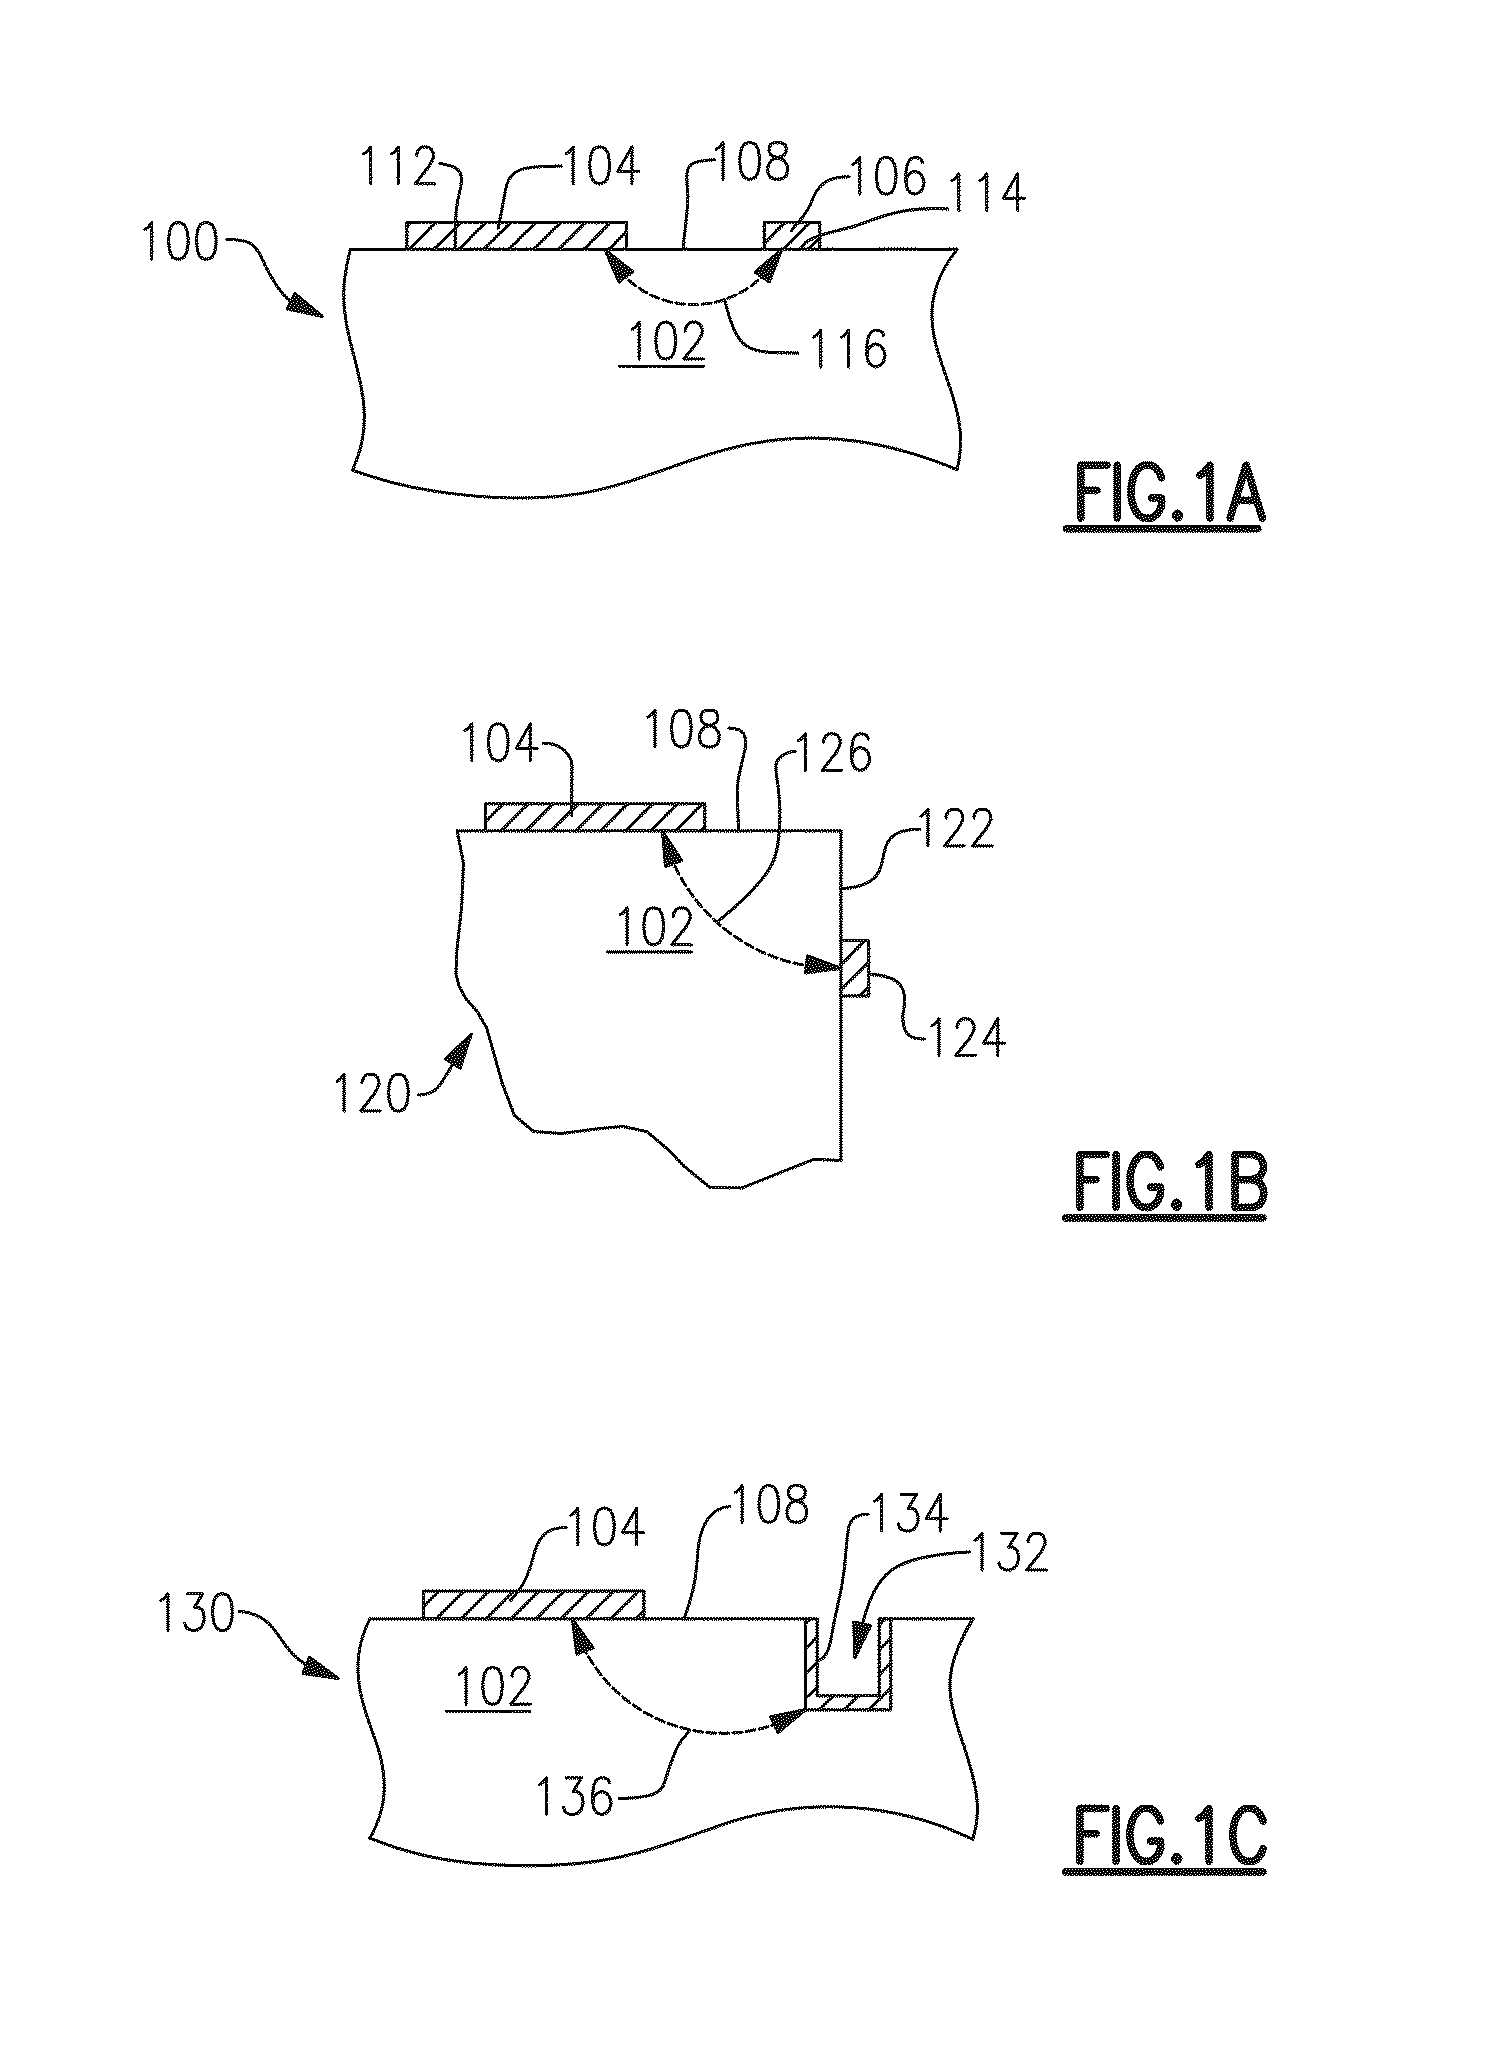 Devices and methods related to interconnect conductors to reduce de-lamination